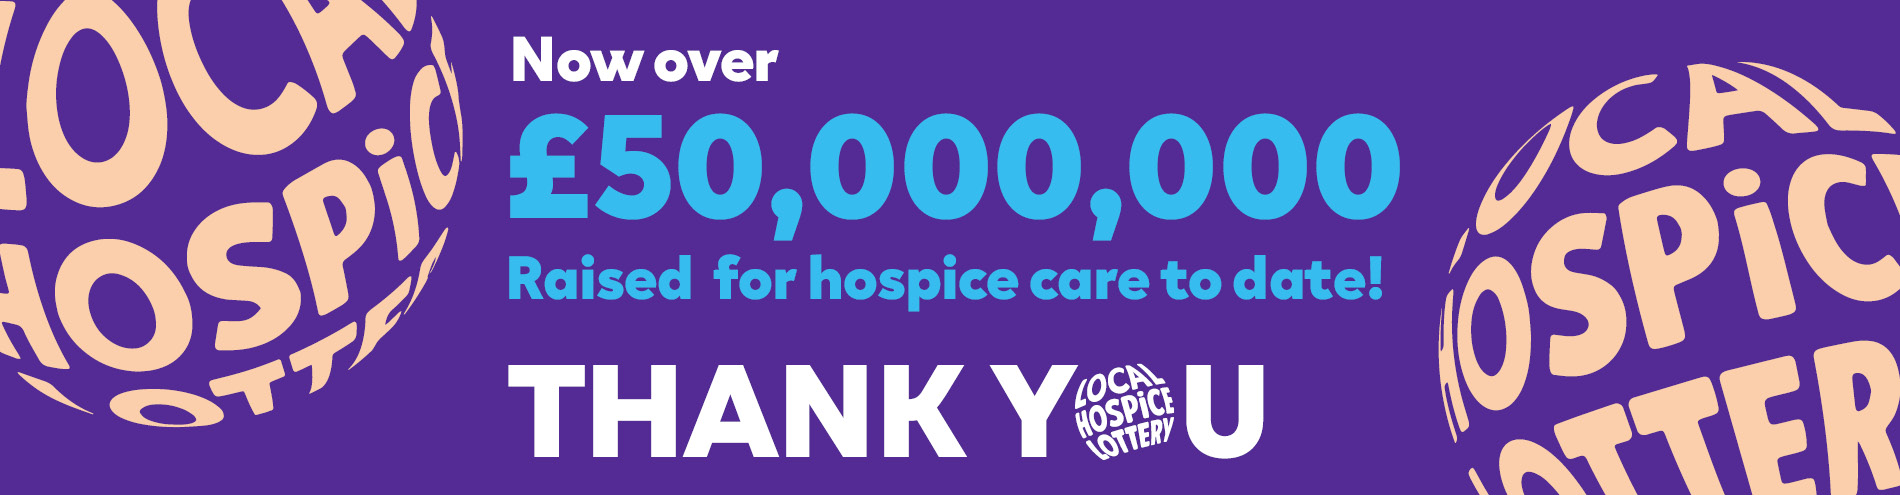 Our hospice, funded by your children's charity Lottery membership